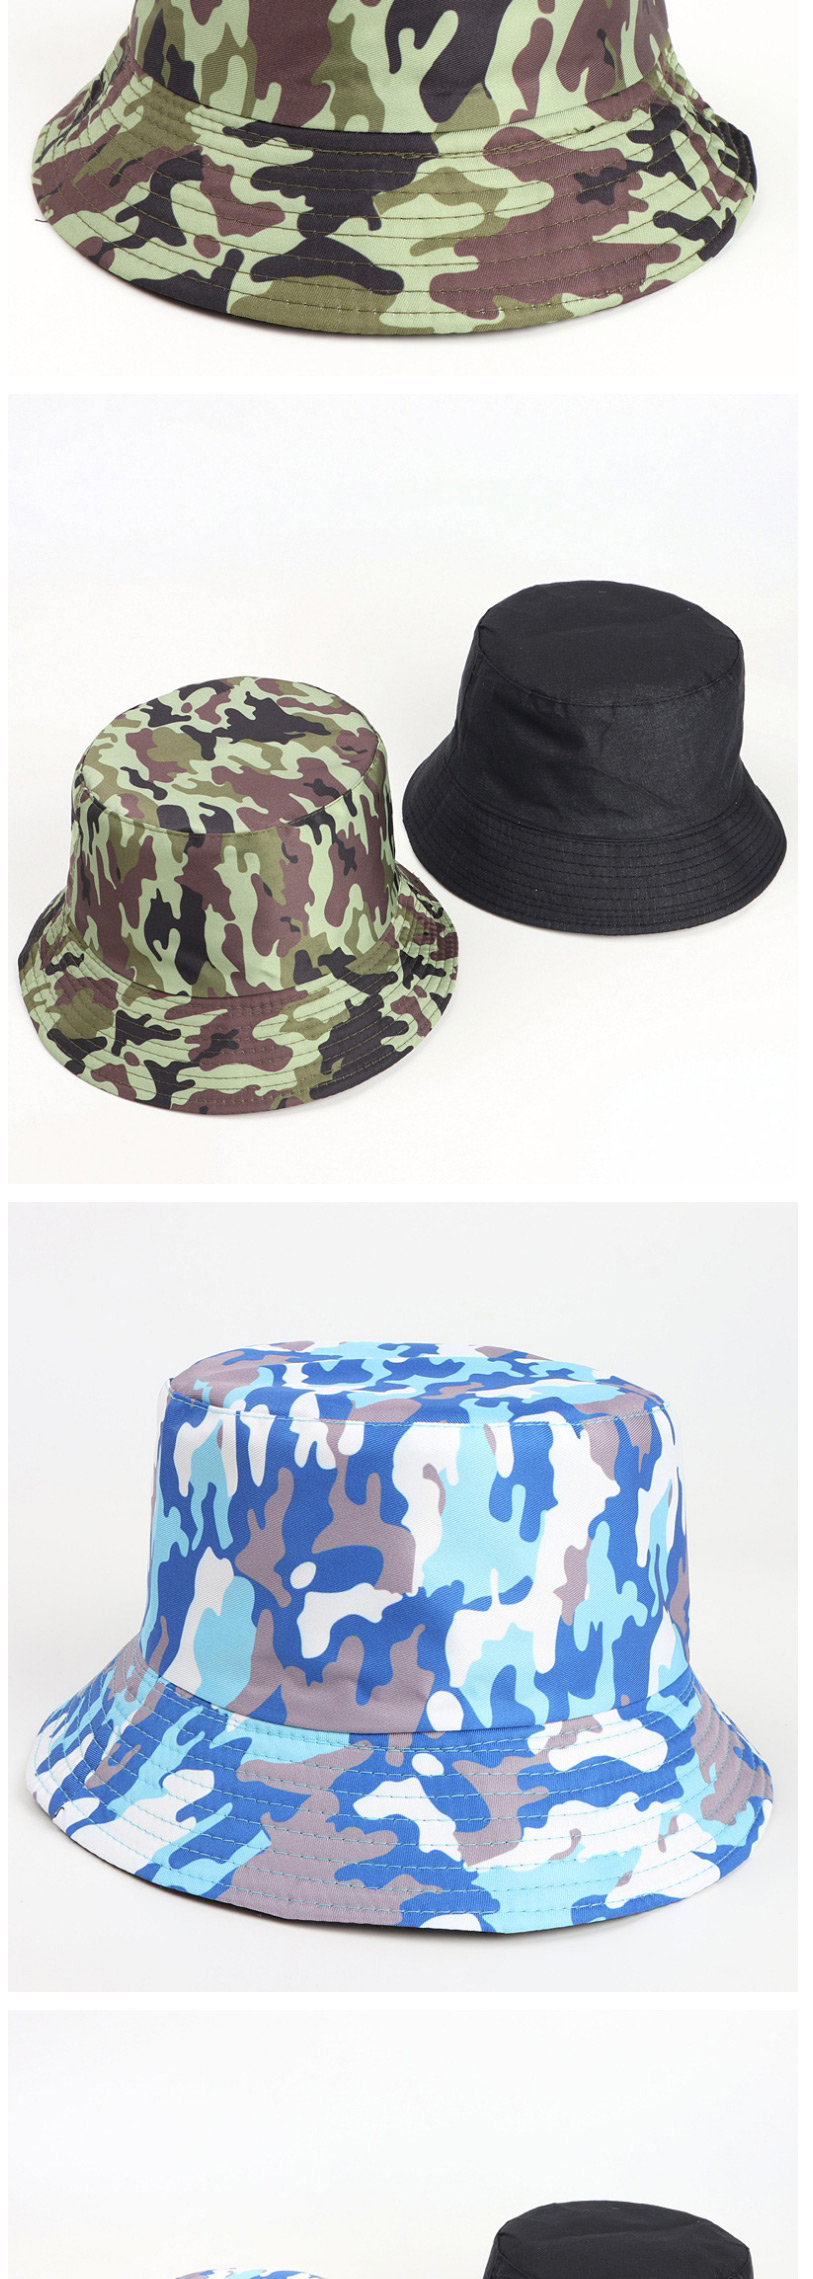 Fashion Digital Camouflage-purple Printed Double-sided Multicolor Camouflage Fisherman Hat,Sun Hats